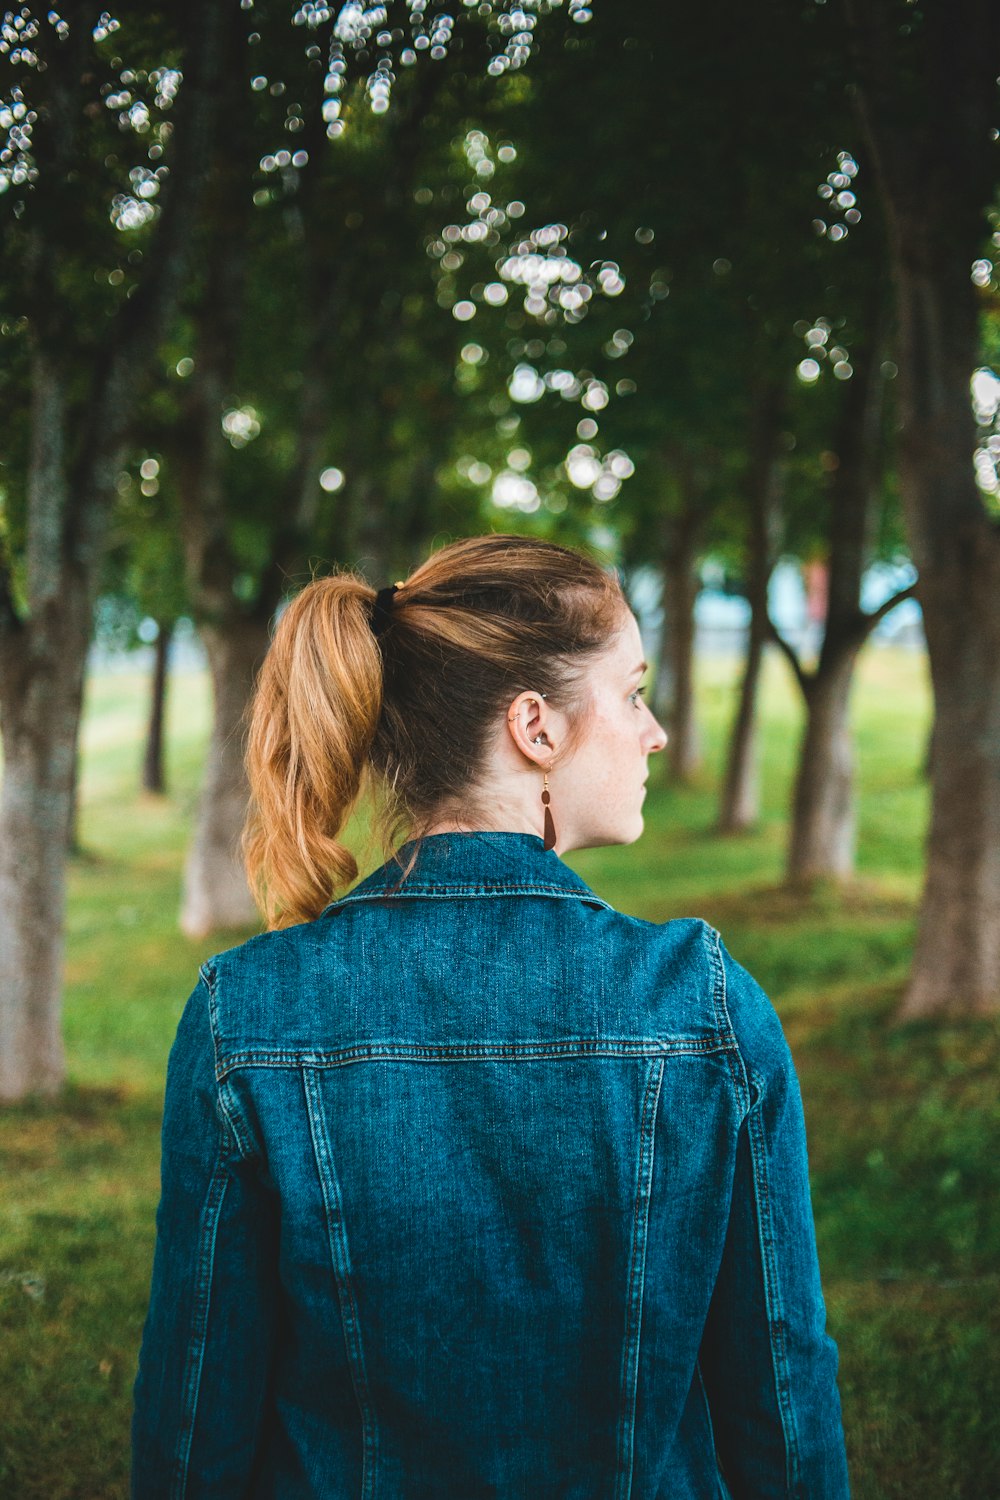 woman in blue denim jacket standing near trees during daytime